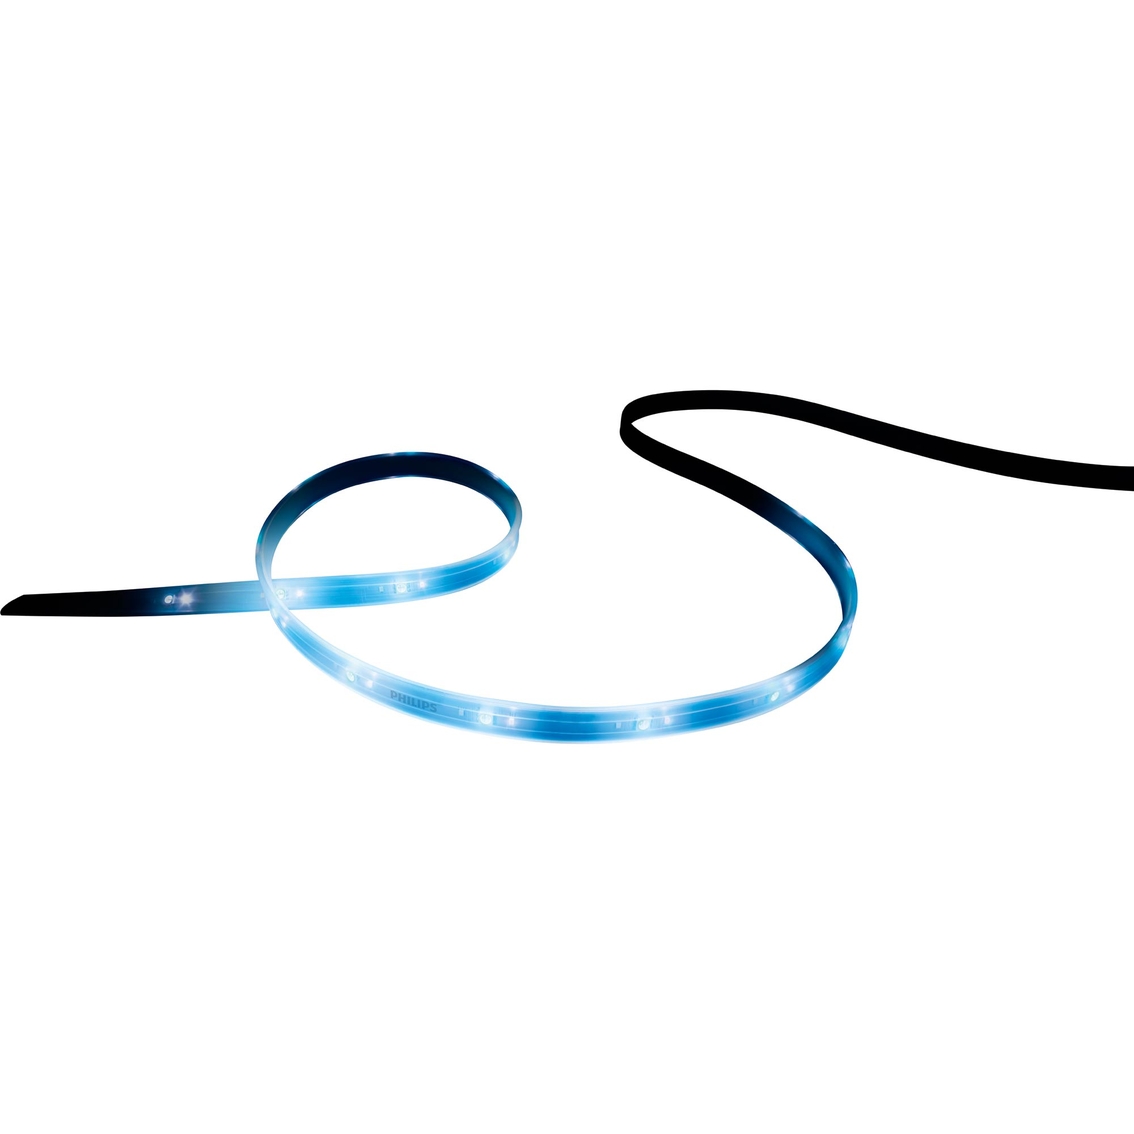 Philips Hue White and Color Ambiance Lightstrip Plus 2m Base Kit - Image 3 of 3